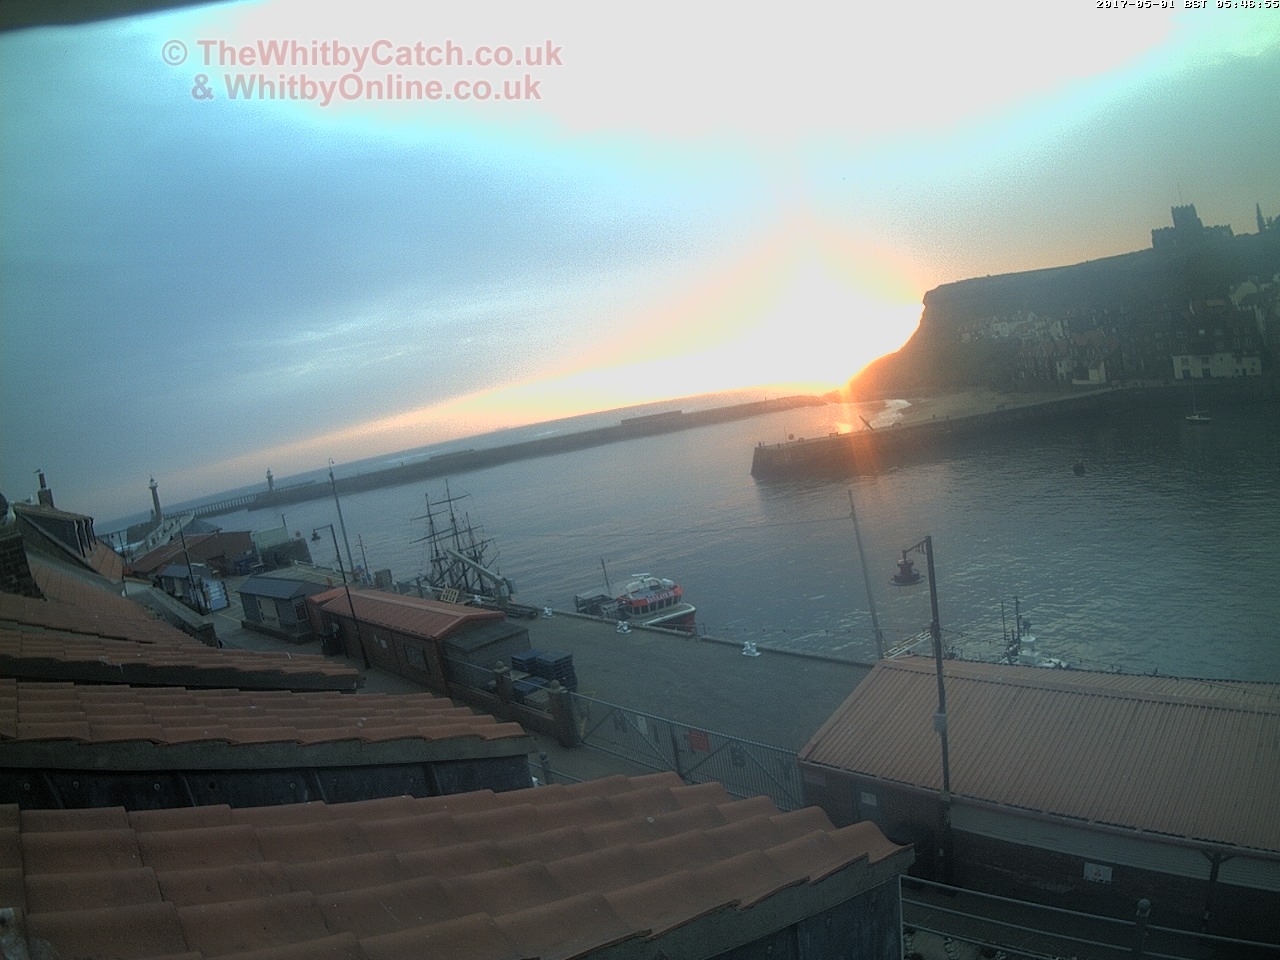 Whitby Mon 1st May 2017 05:47.